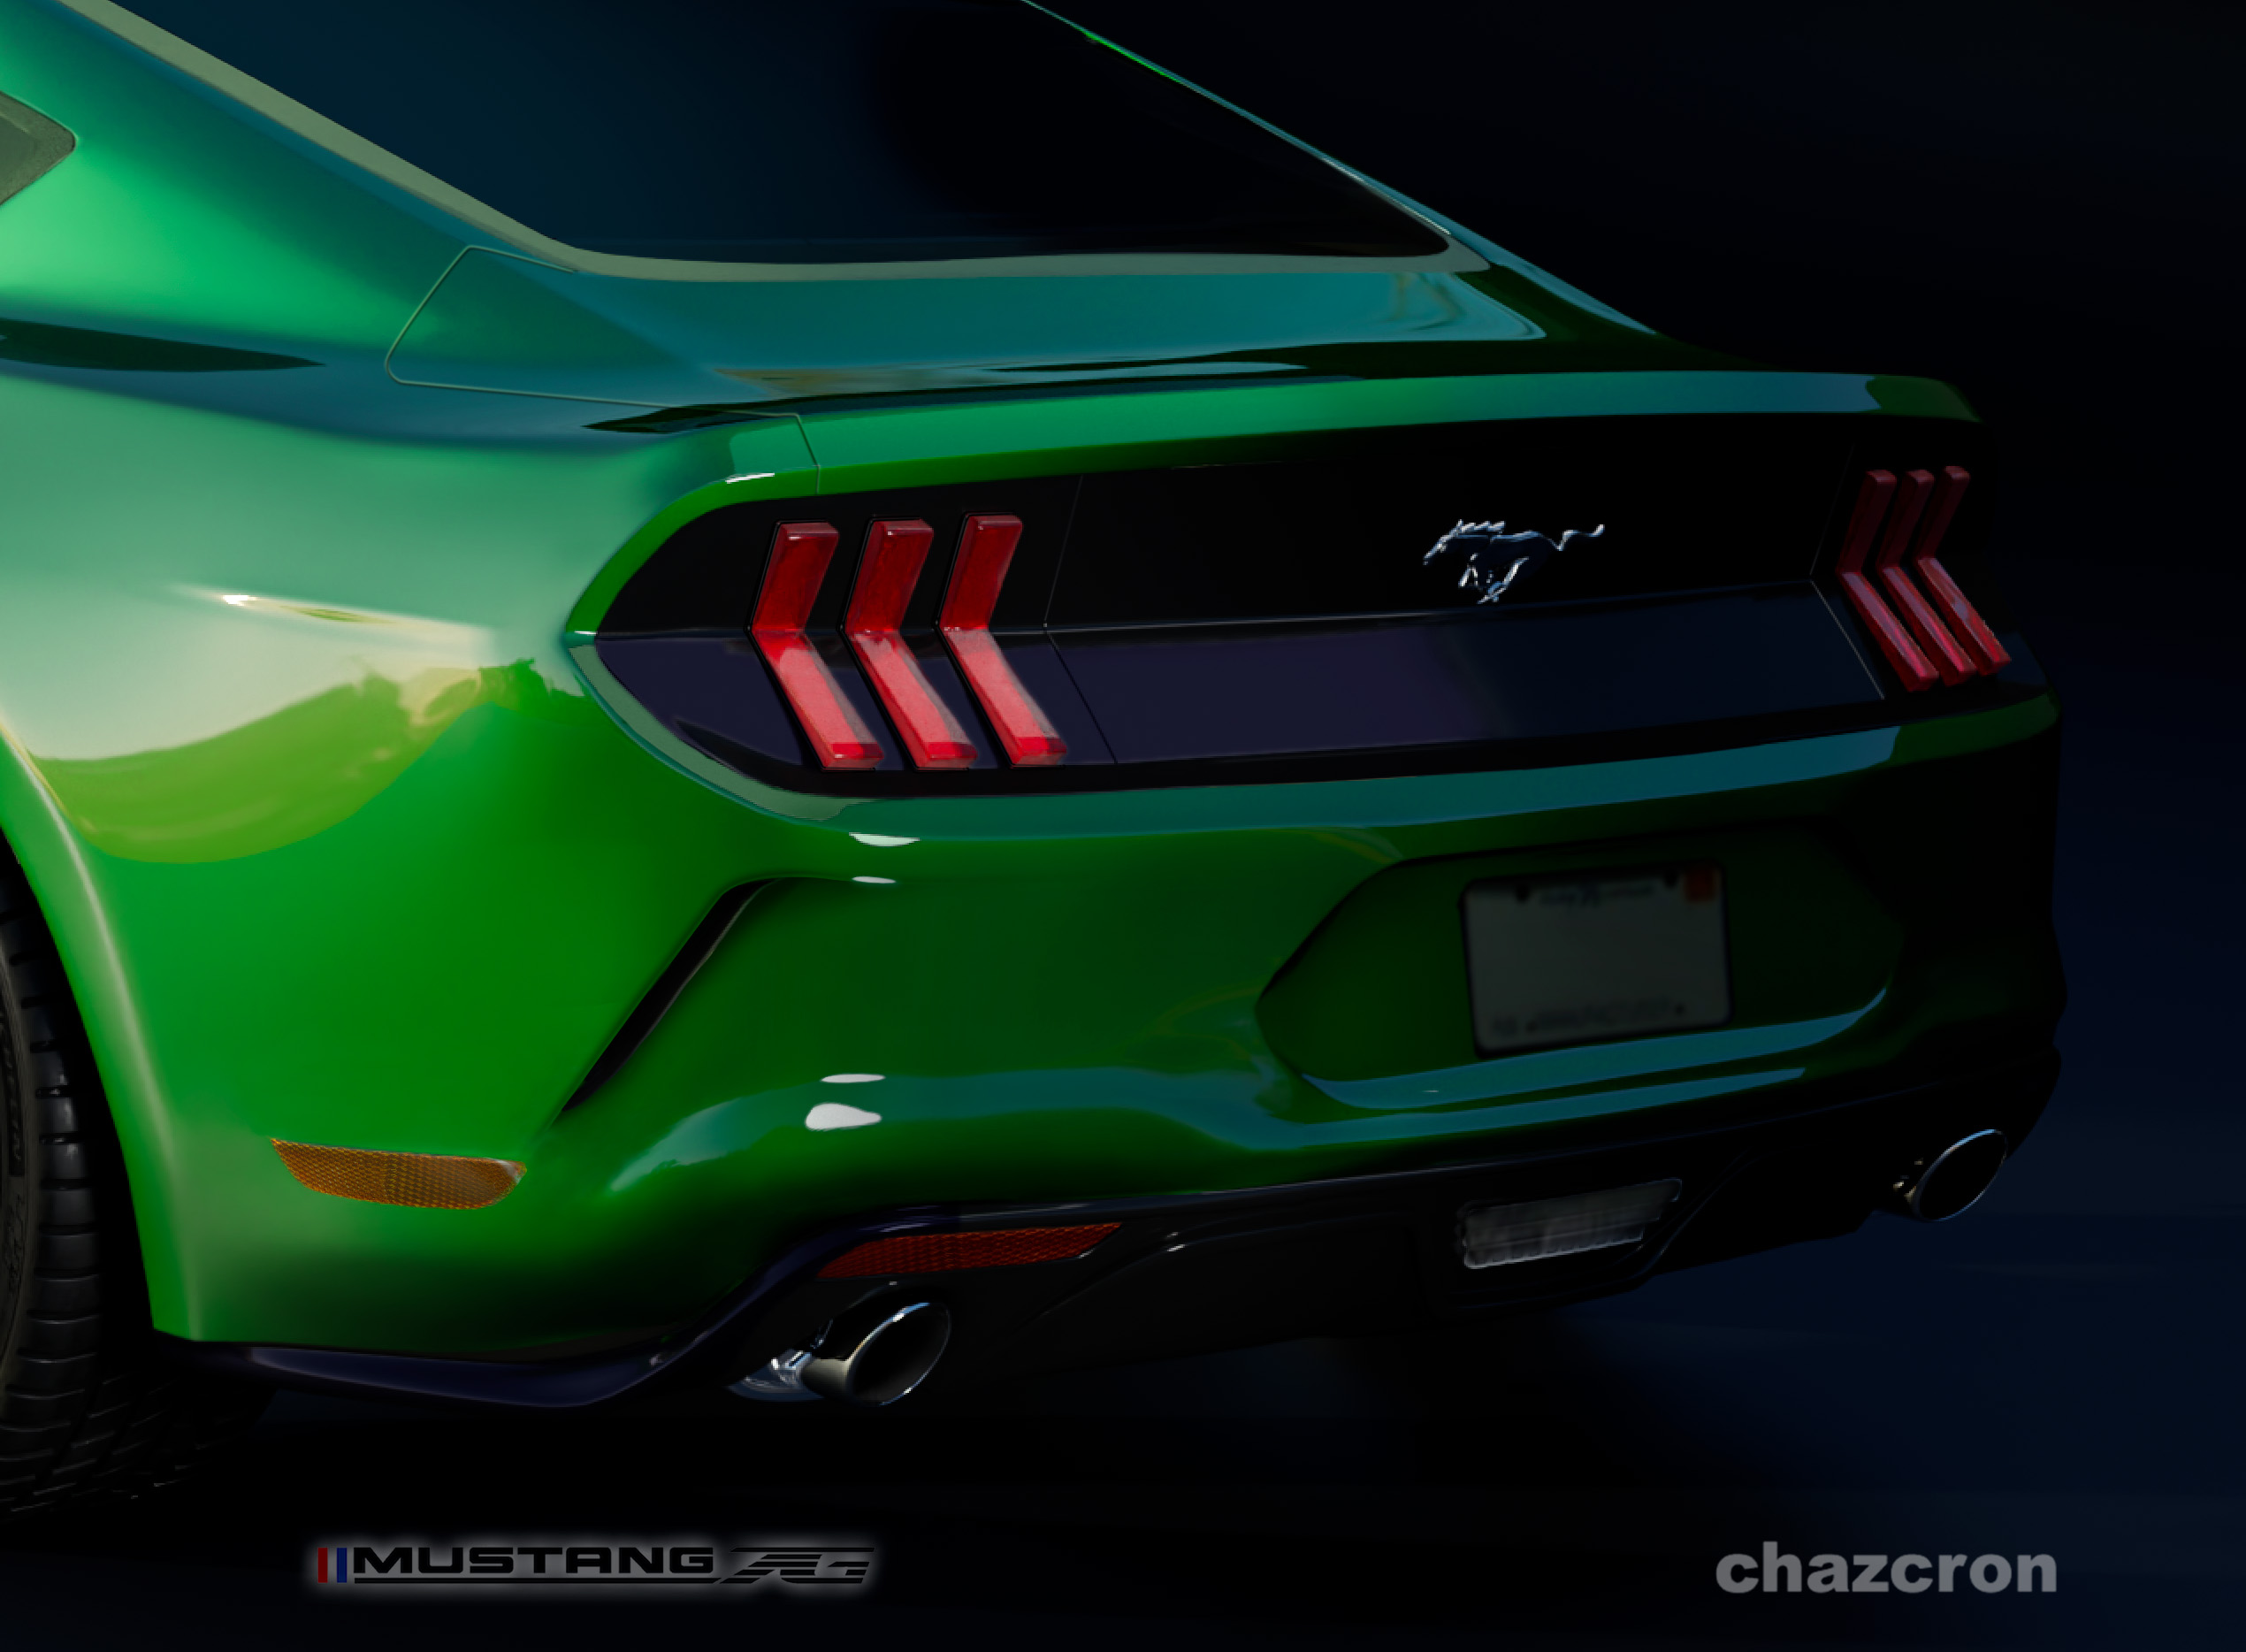 S650 Mustang chazcron weighs in... 7th gen 2023 Mustang S650 3D model & renderings in several colors! 1661810693417